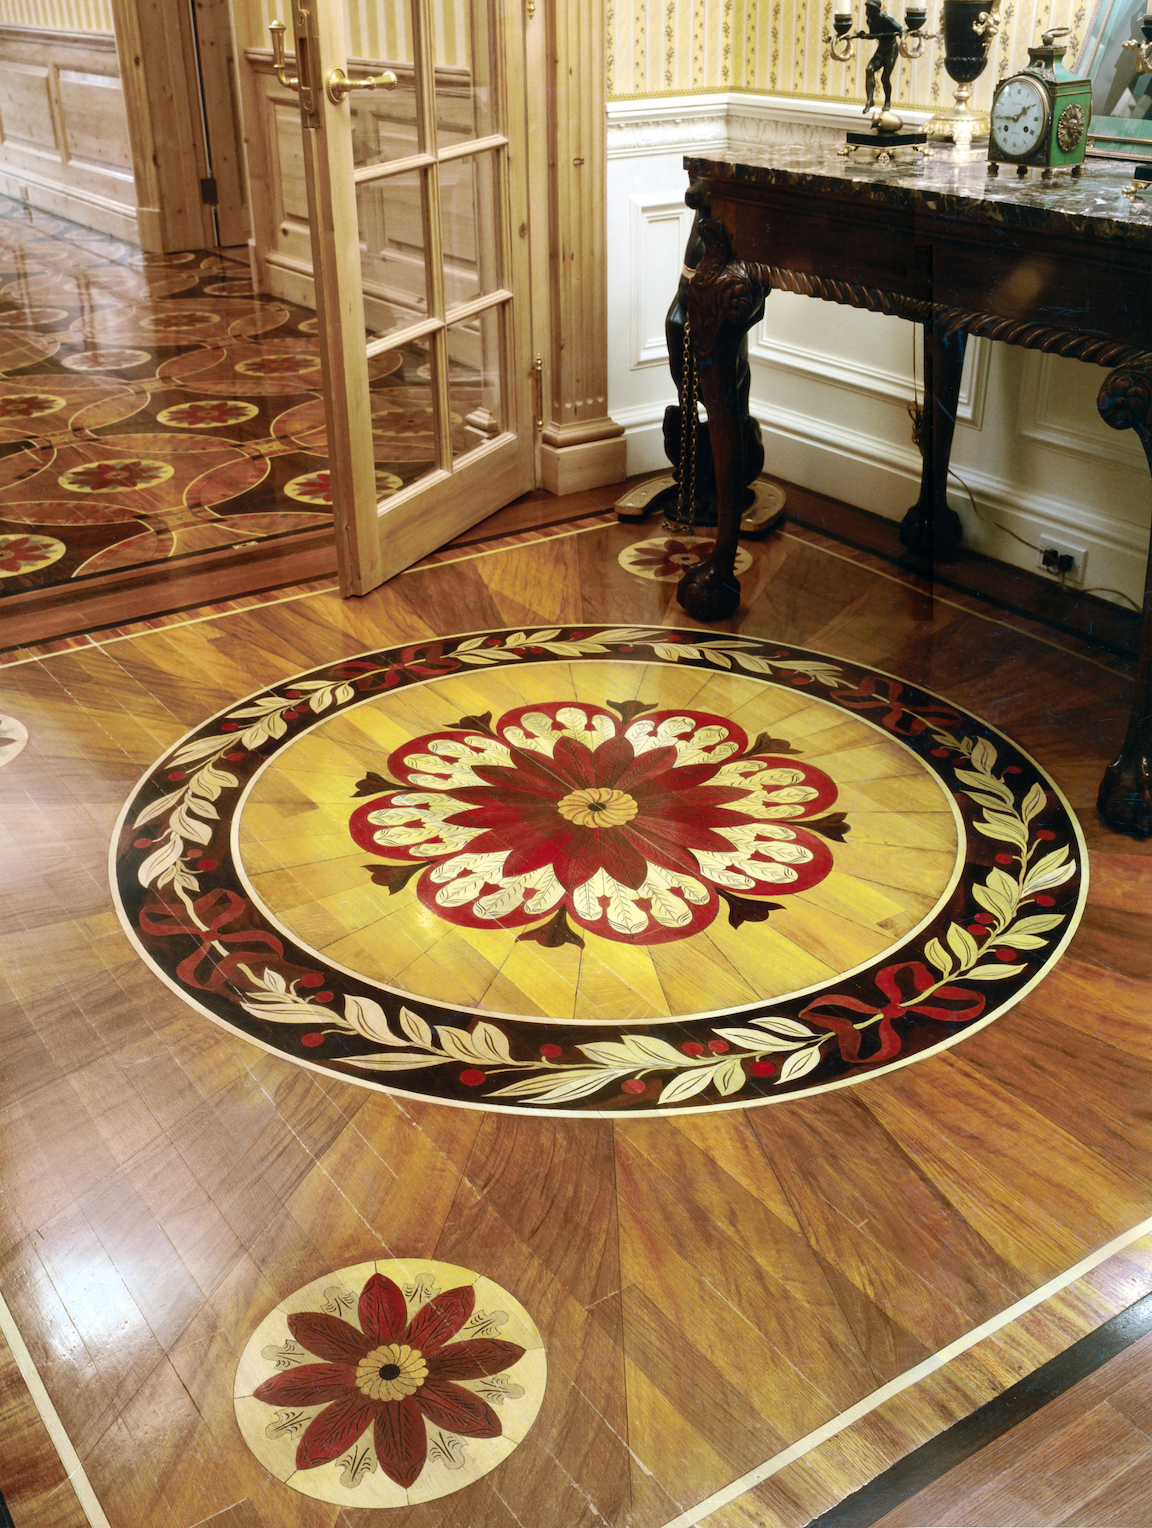 8 Best Painted Floor Ideas - How to Paint a Floor